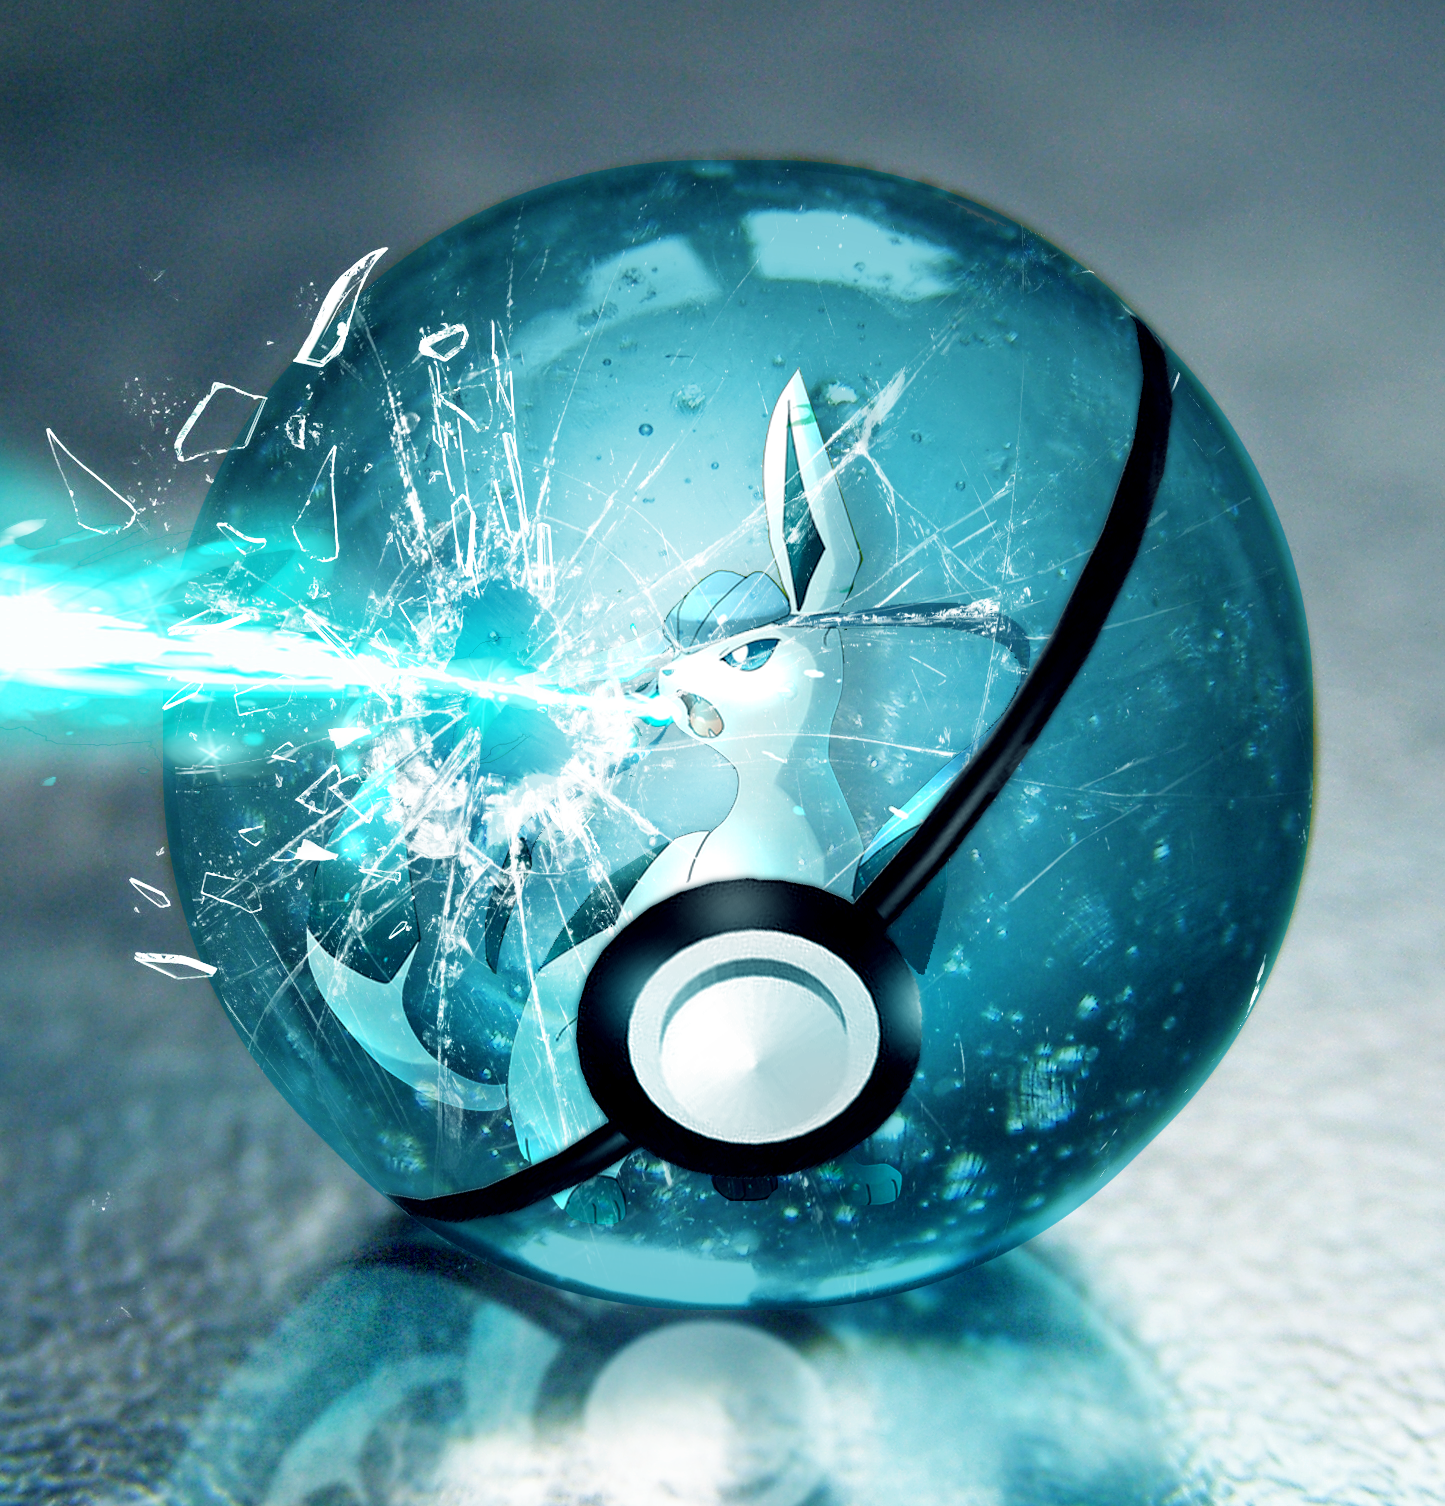 Glaceon In Pokeball By G1zmo Darg0n